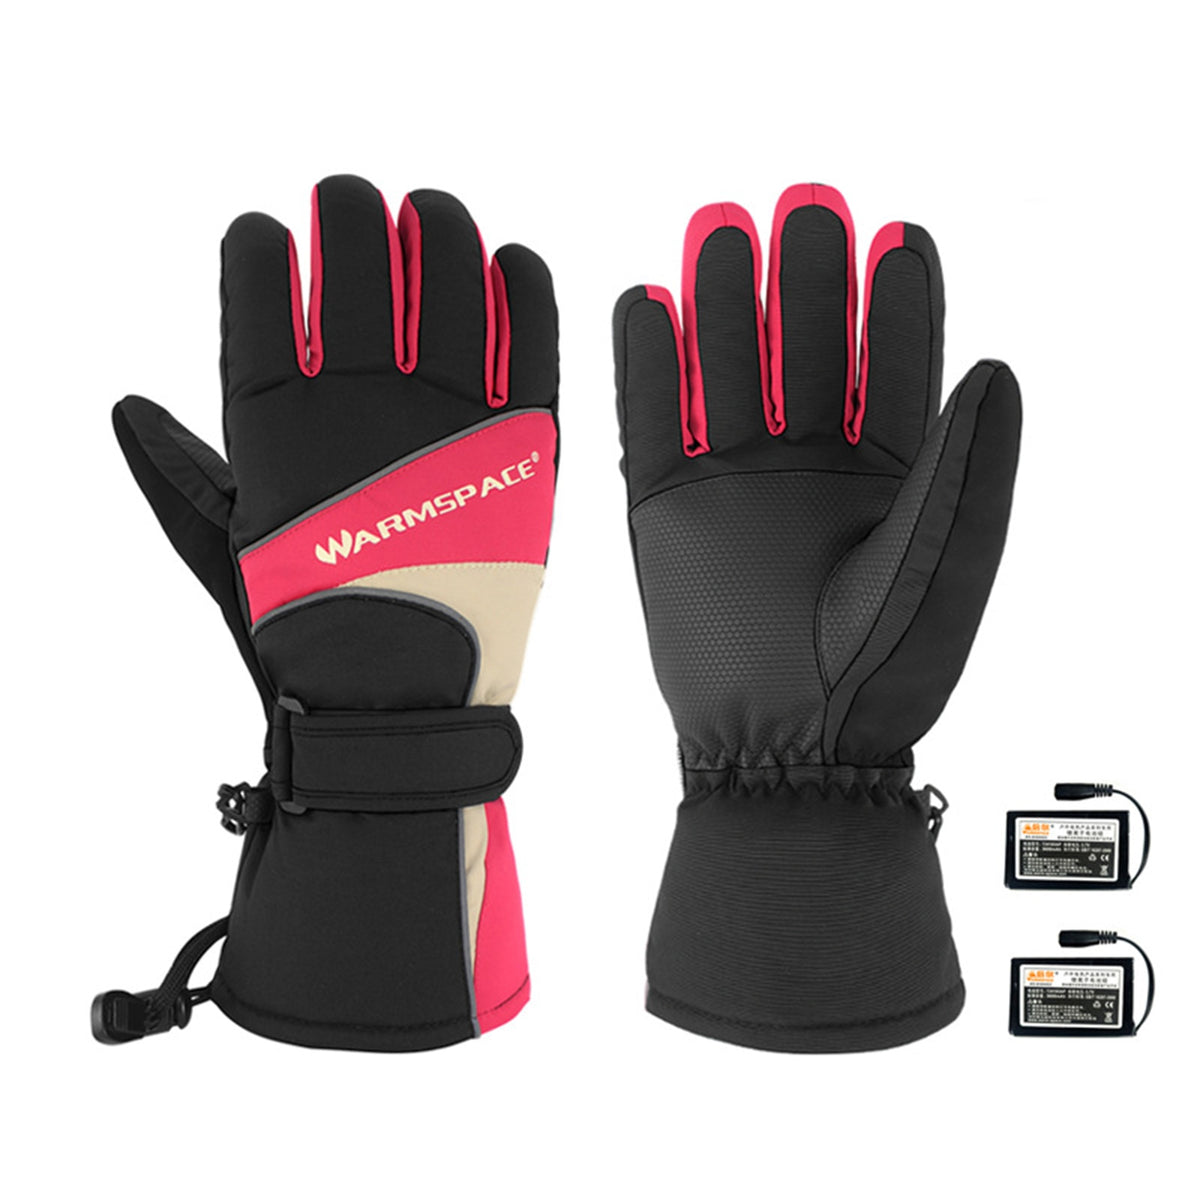 Outdoor Heated Gloves Finger And Back Heating Winter Ski Bike Motorcycle Cycling Warm Gloves With 3600MAH Rechargeable Battery